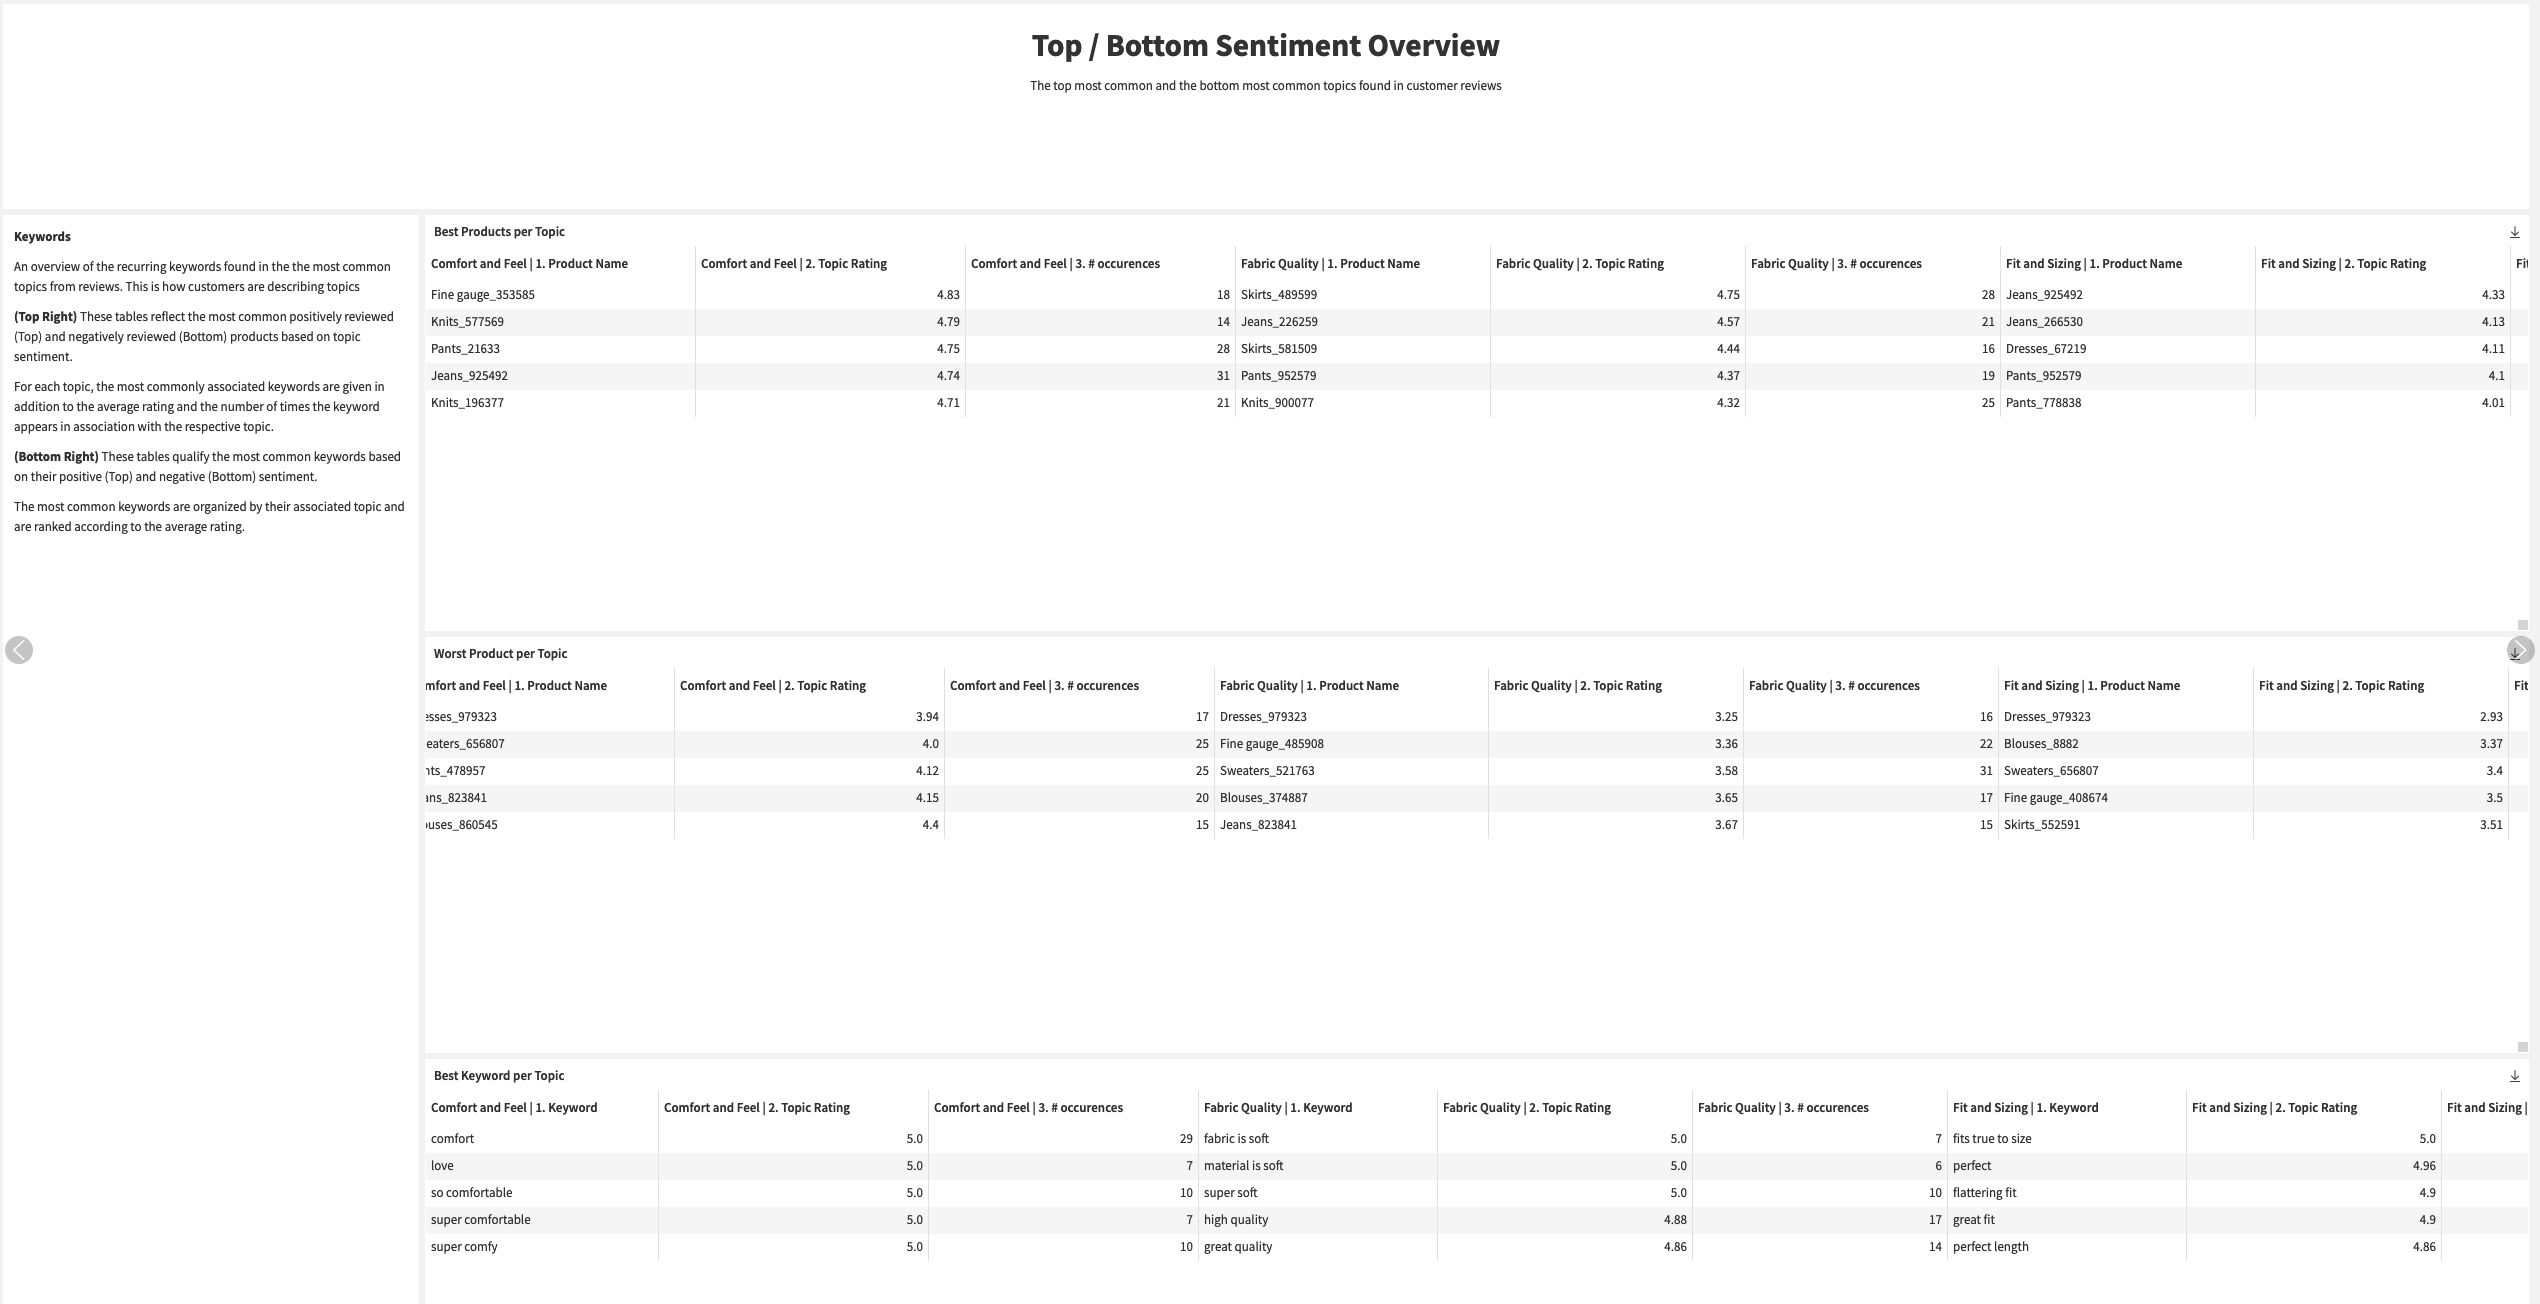 Table of products and keywords rated by topics